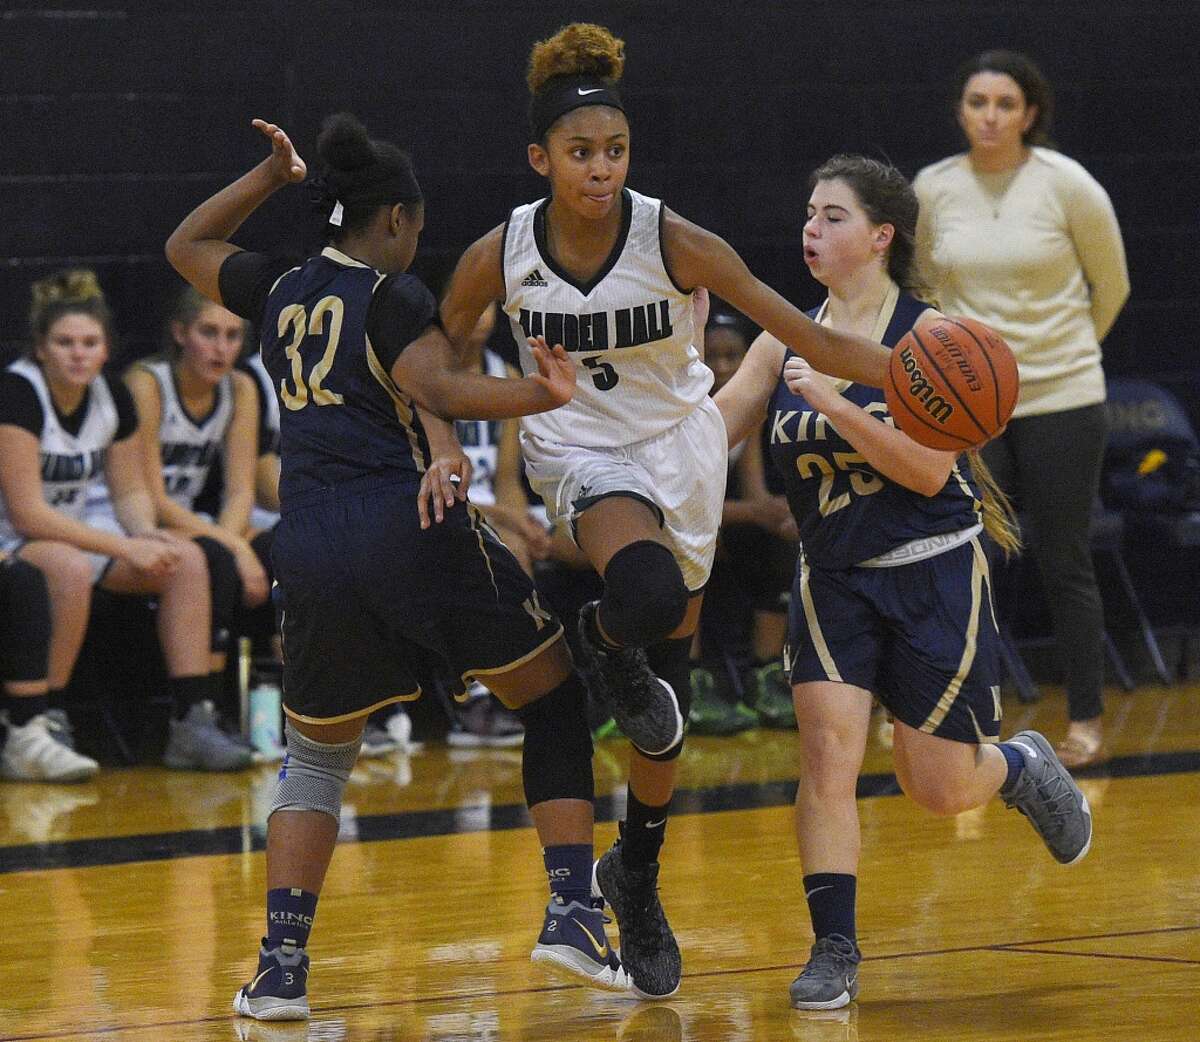 Action from the high school girls basketball game between King School and Hamden Hall at King School in Stamford, Conn. Tuesday, Jan. 8, 2019.